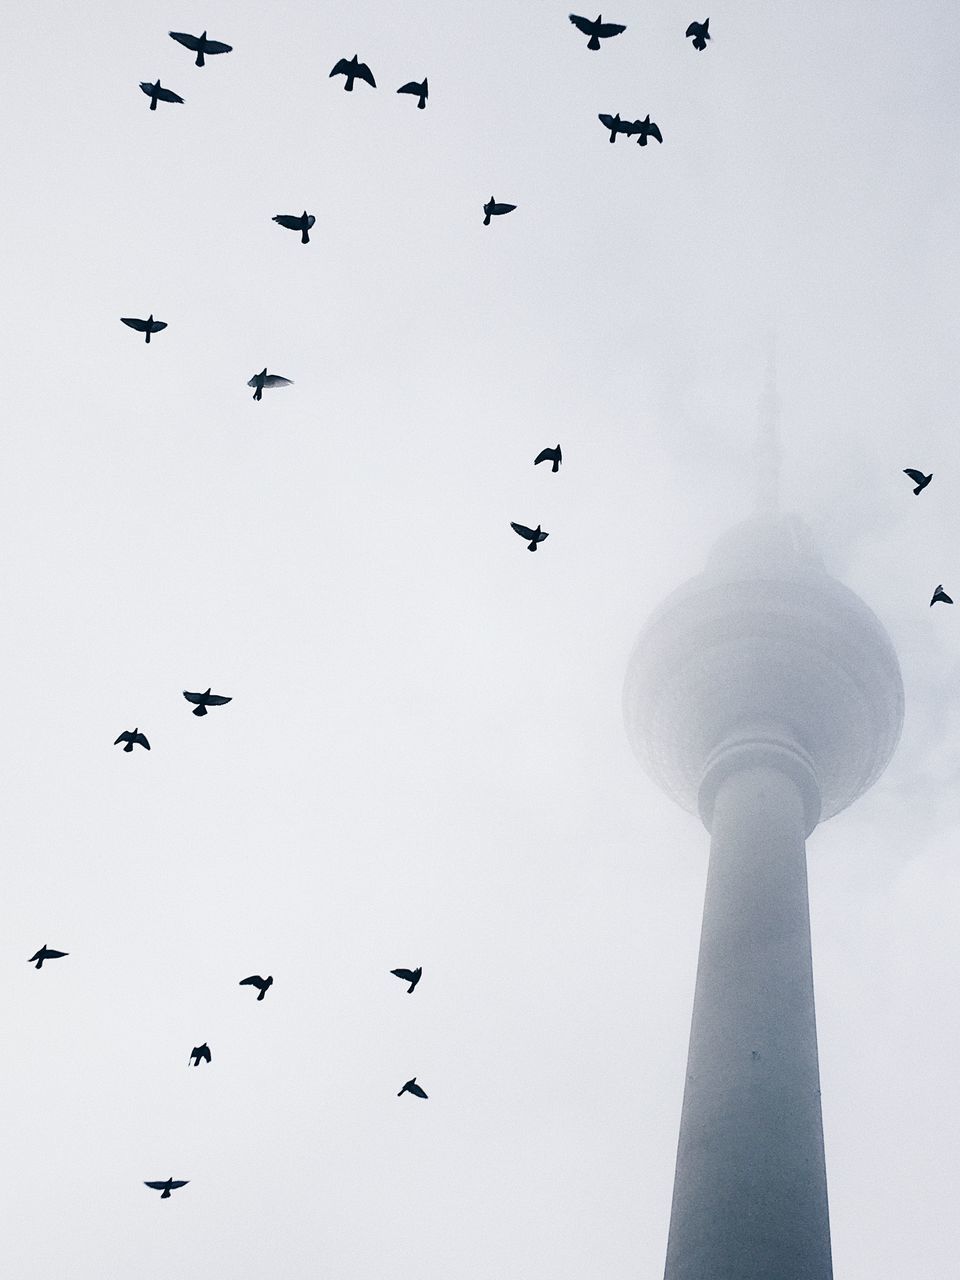 LOW ANGLE VIEW OF BIRDS FLYING AGAINST THE SKY